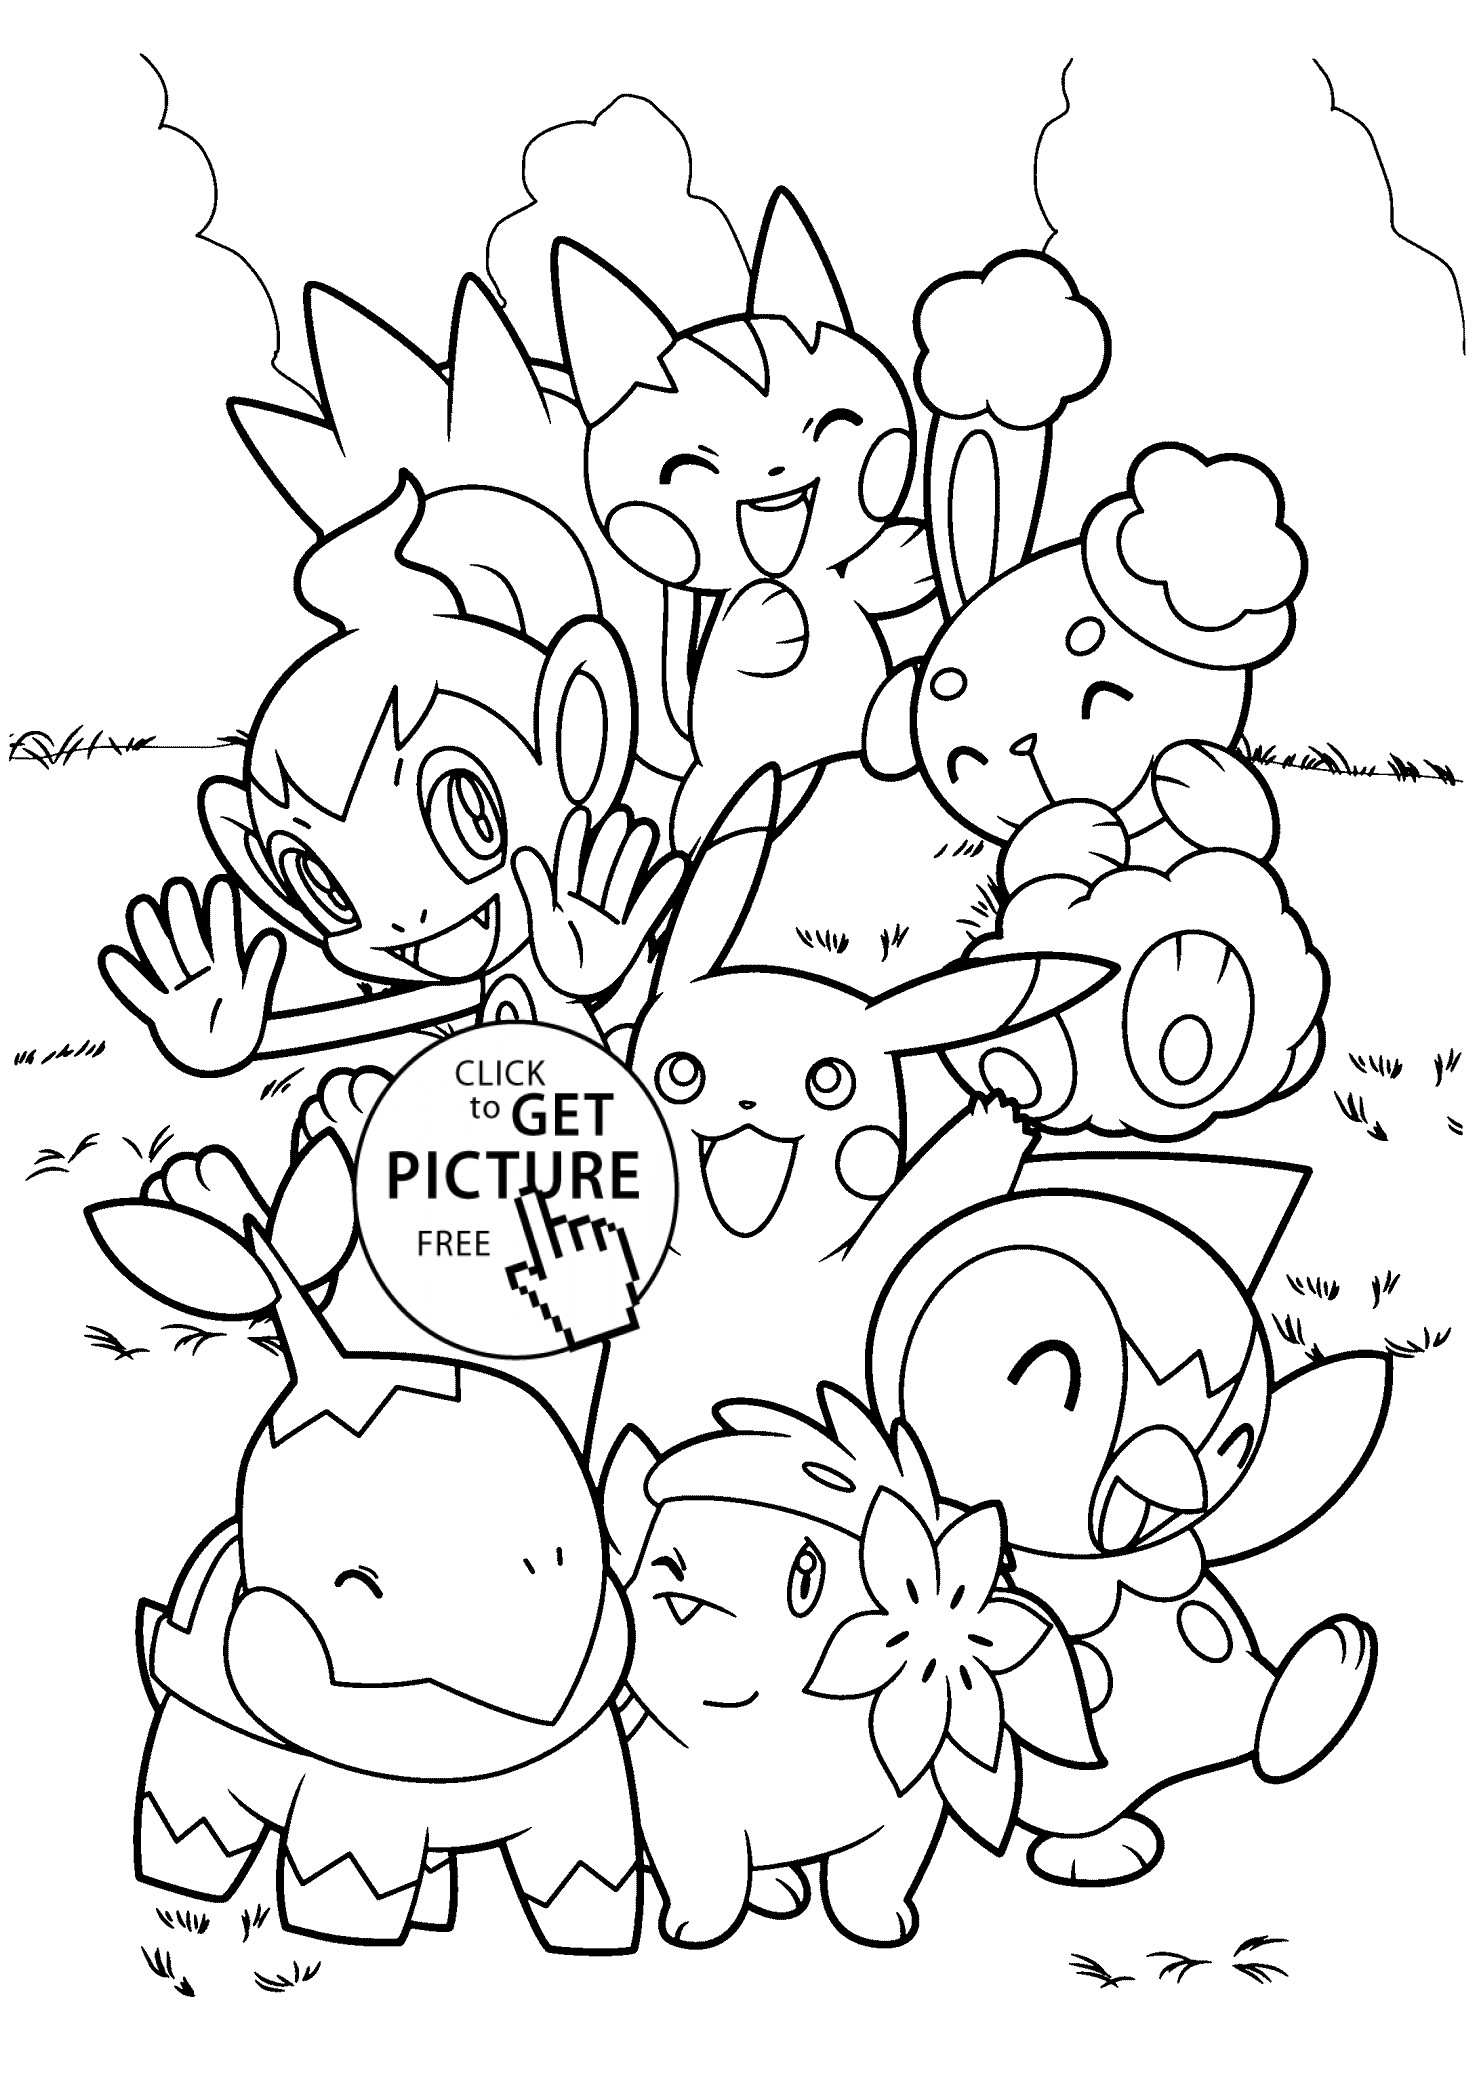 Kids Coloring Pages Pokemon
 Pokemon characters anime coloring pages for kids